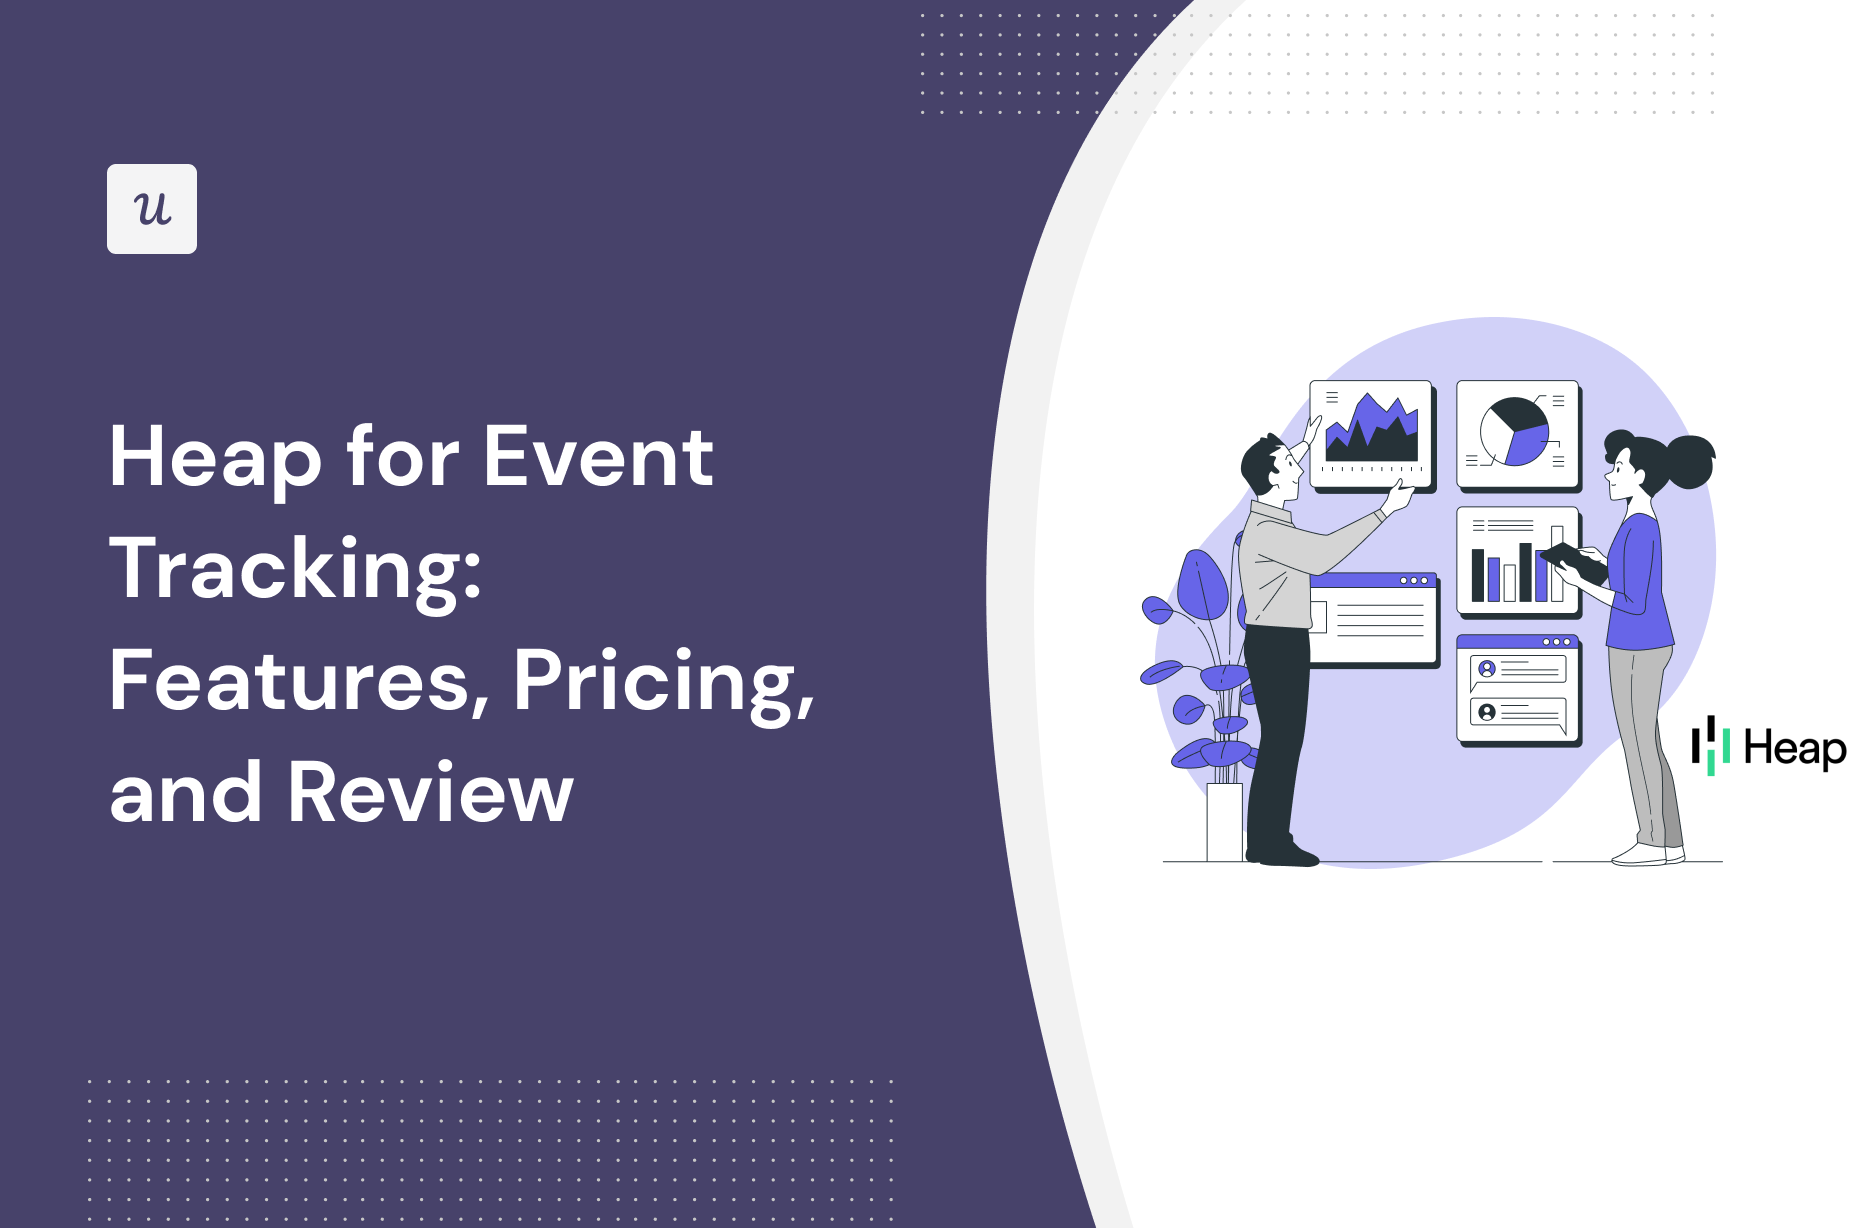 Heap for Event tracking: Features, Pricing, and Review